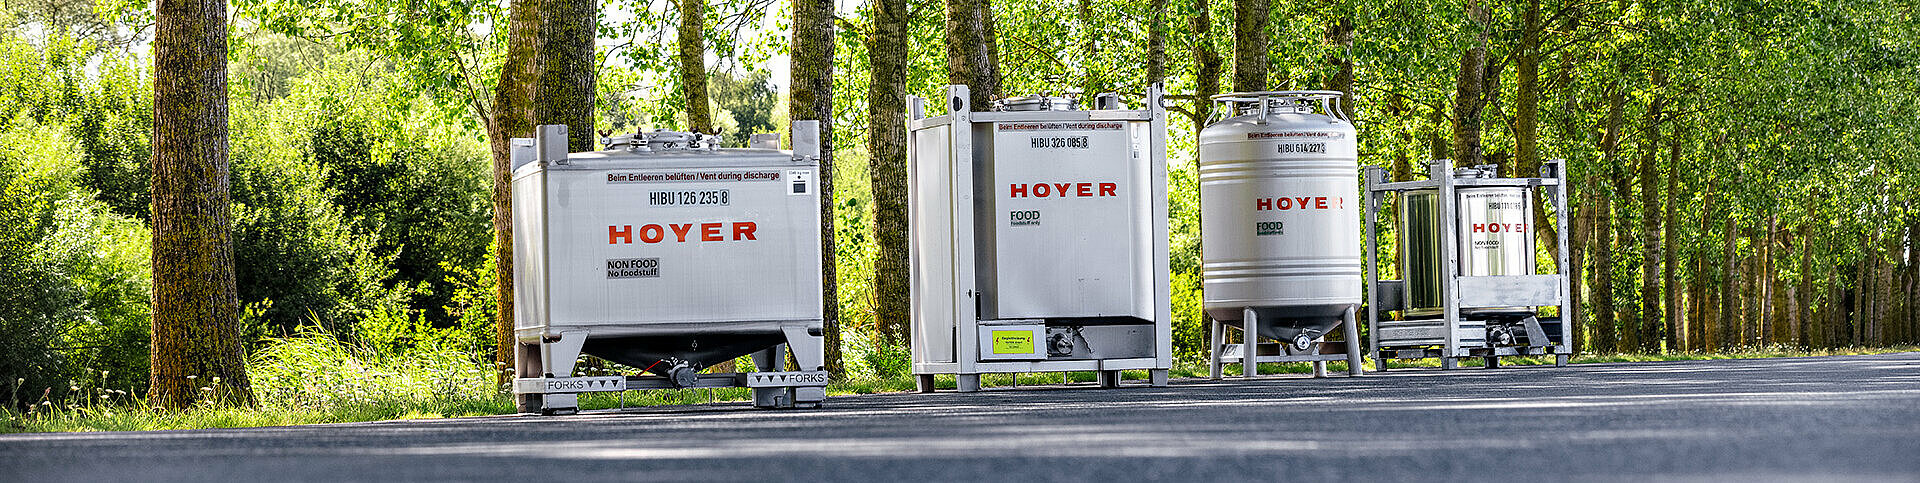 HOYER IBC on a street in front of a wood